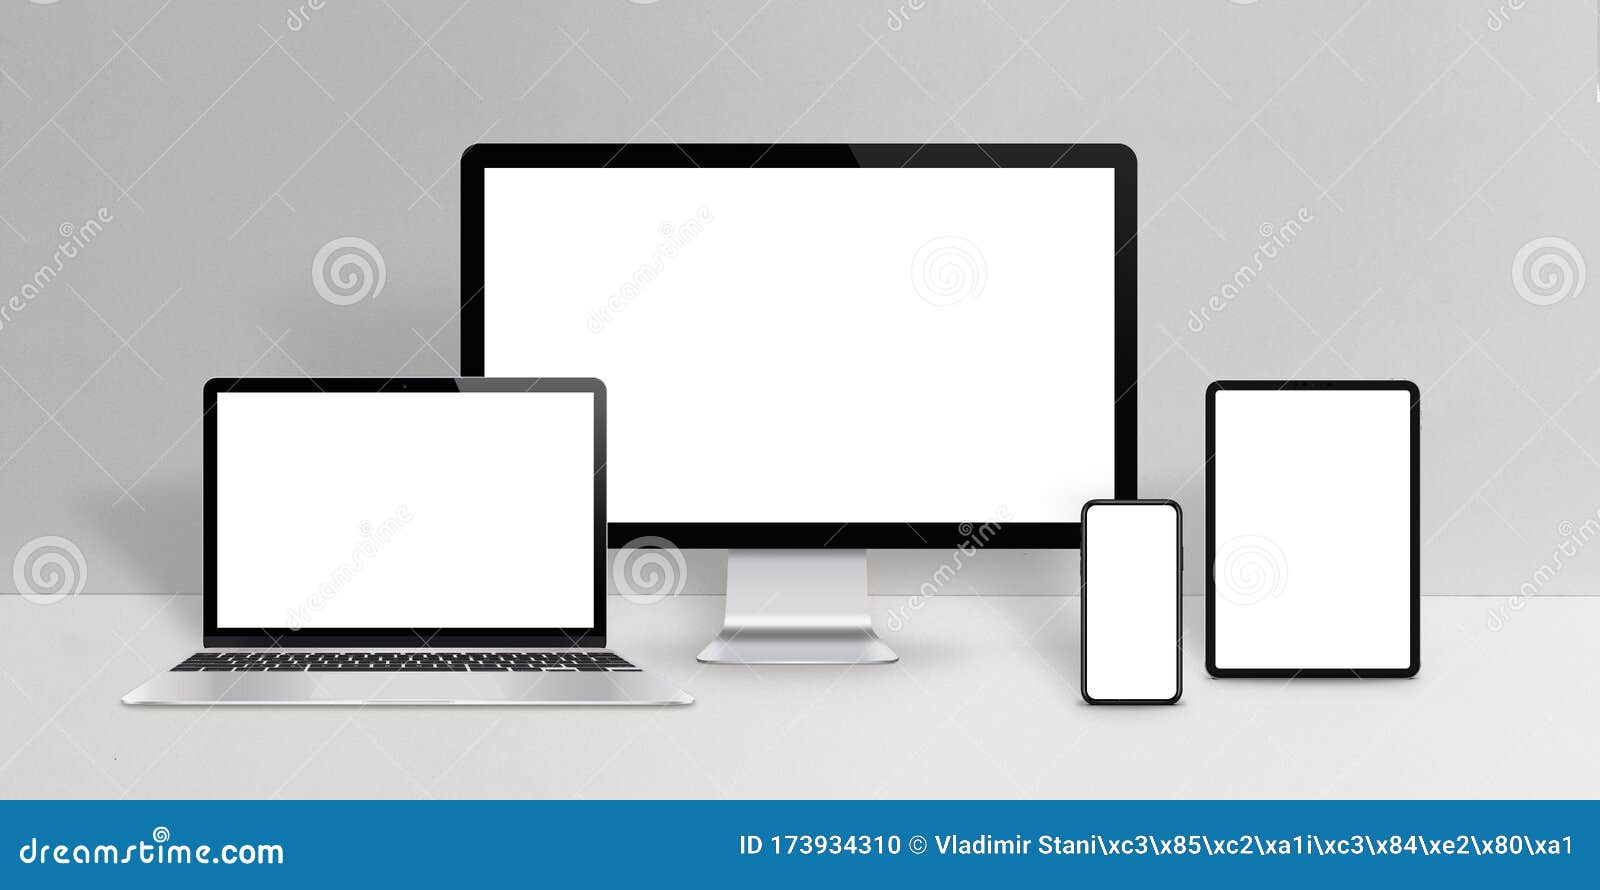 responsive  devices mockup. laptop, computer display, phone and tablet with  screen